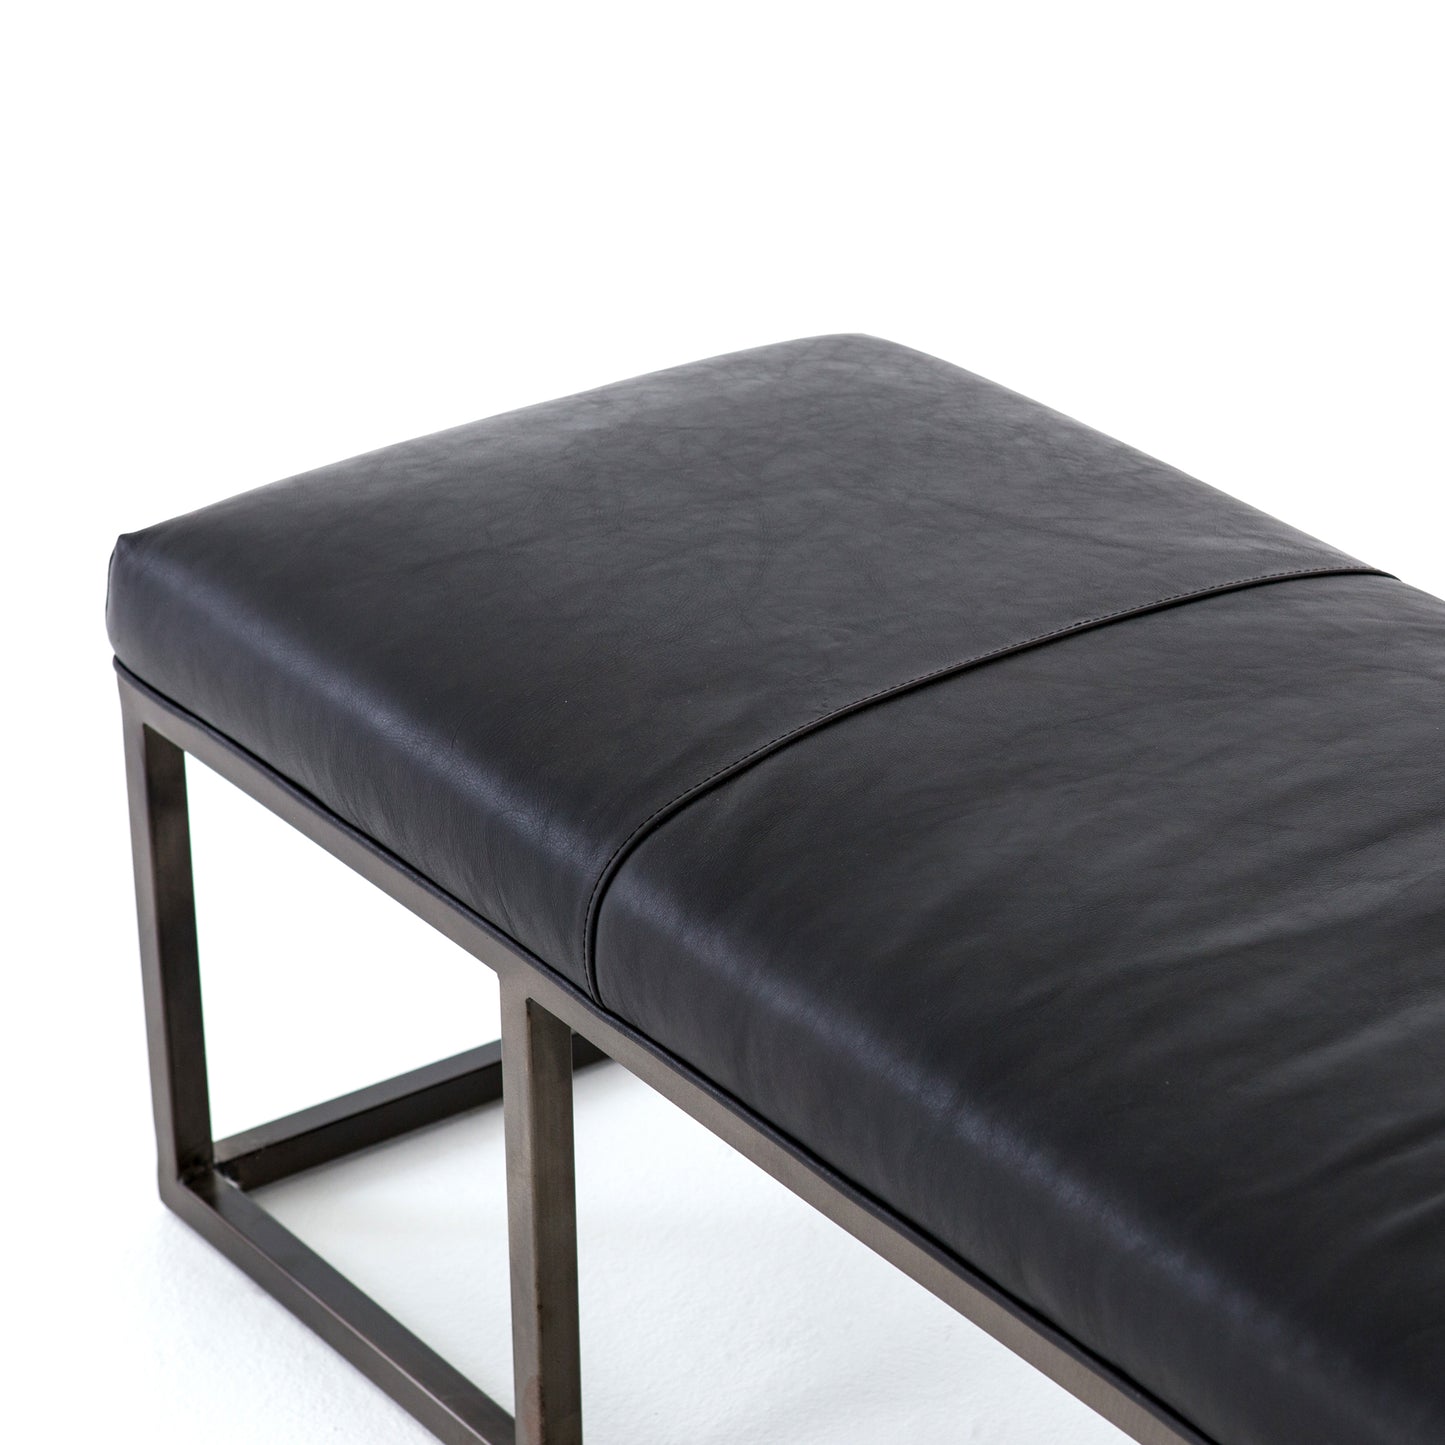 Beaumont Leather Bench-Rider Black